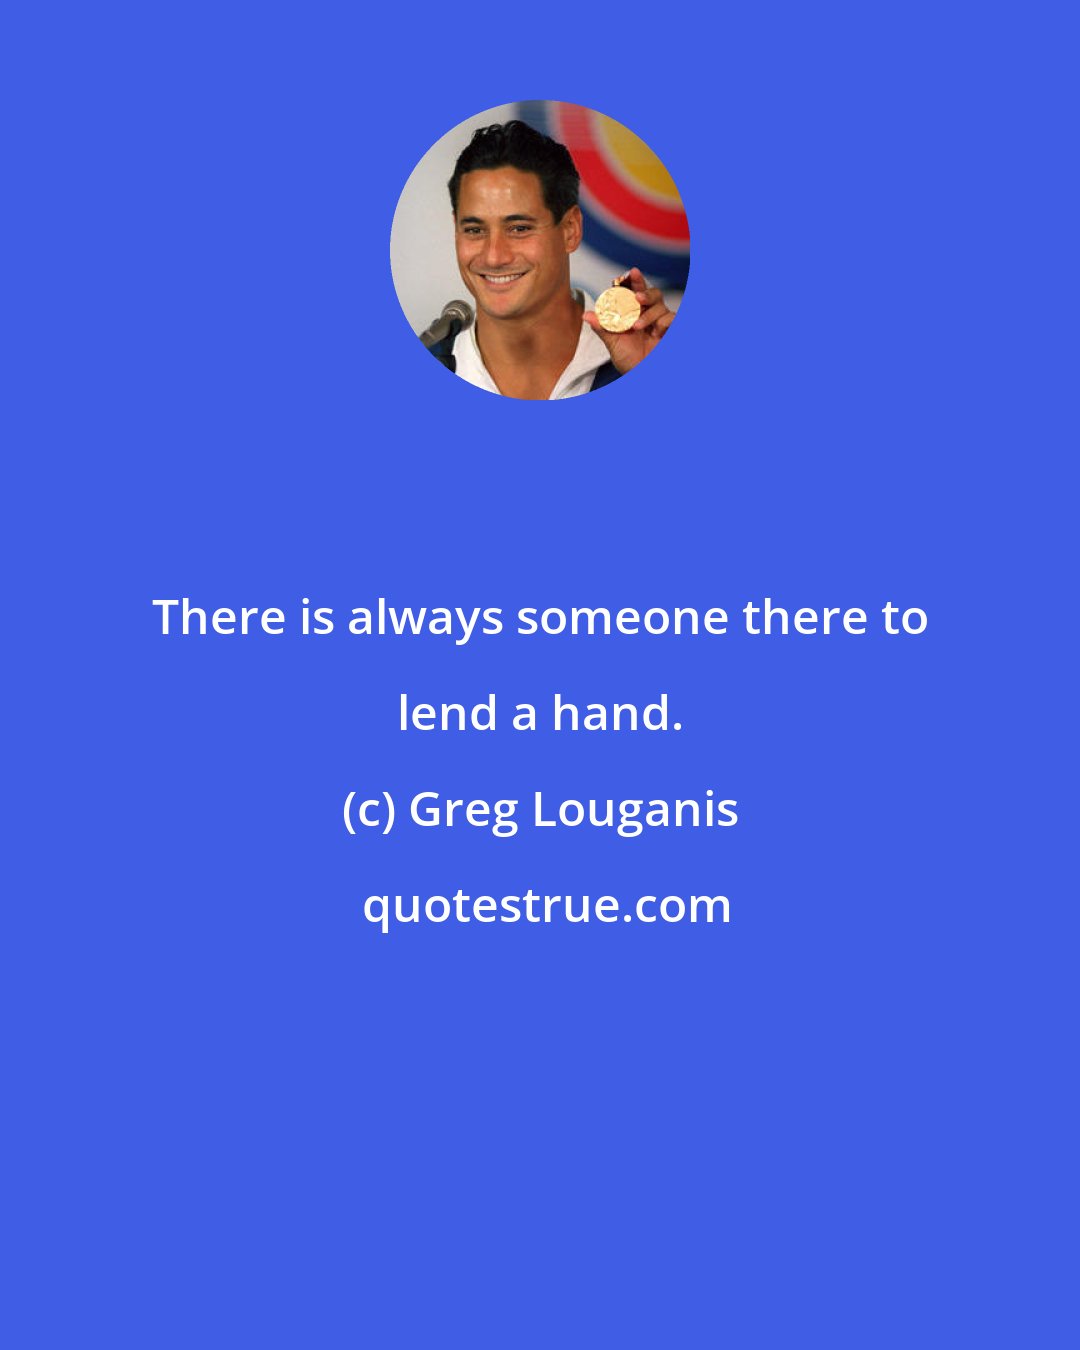 Greg Louganis: There is always someone there to lend a hand.